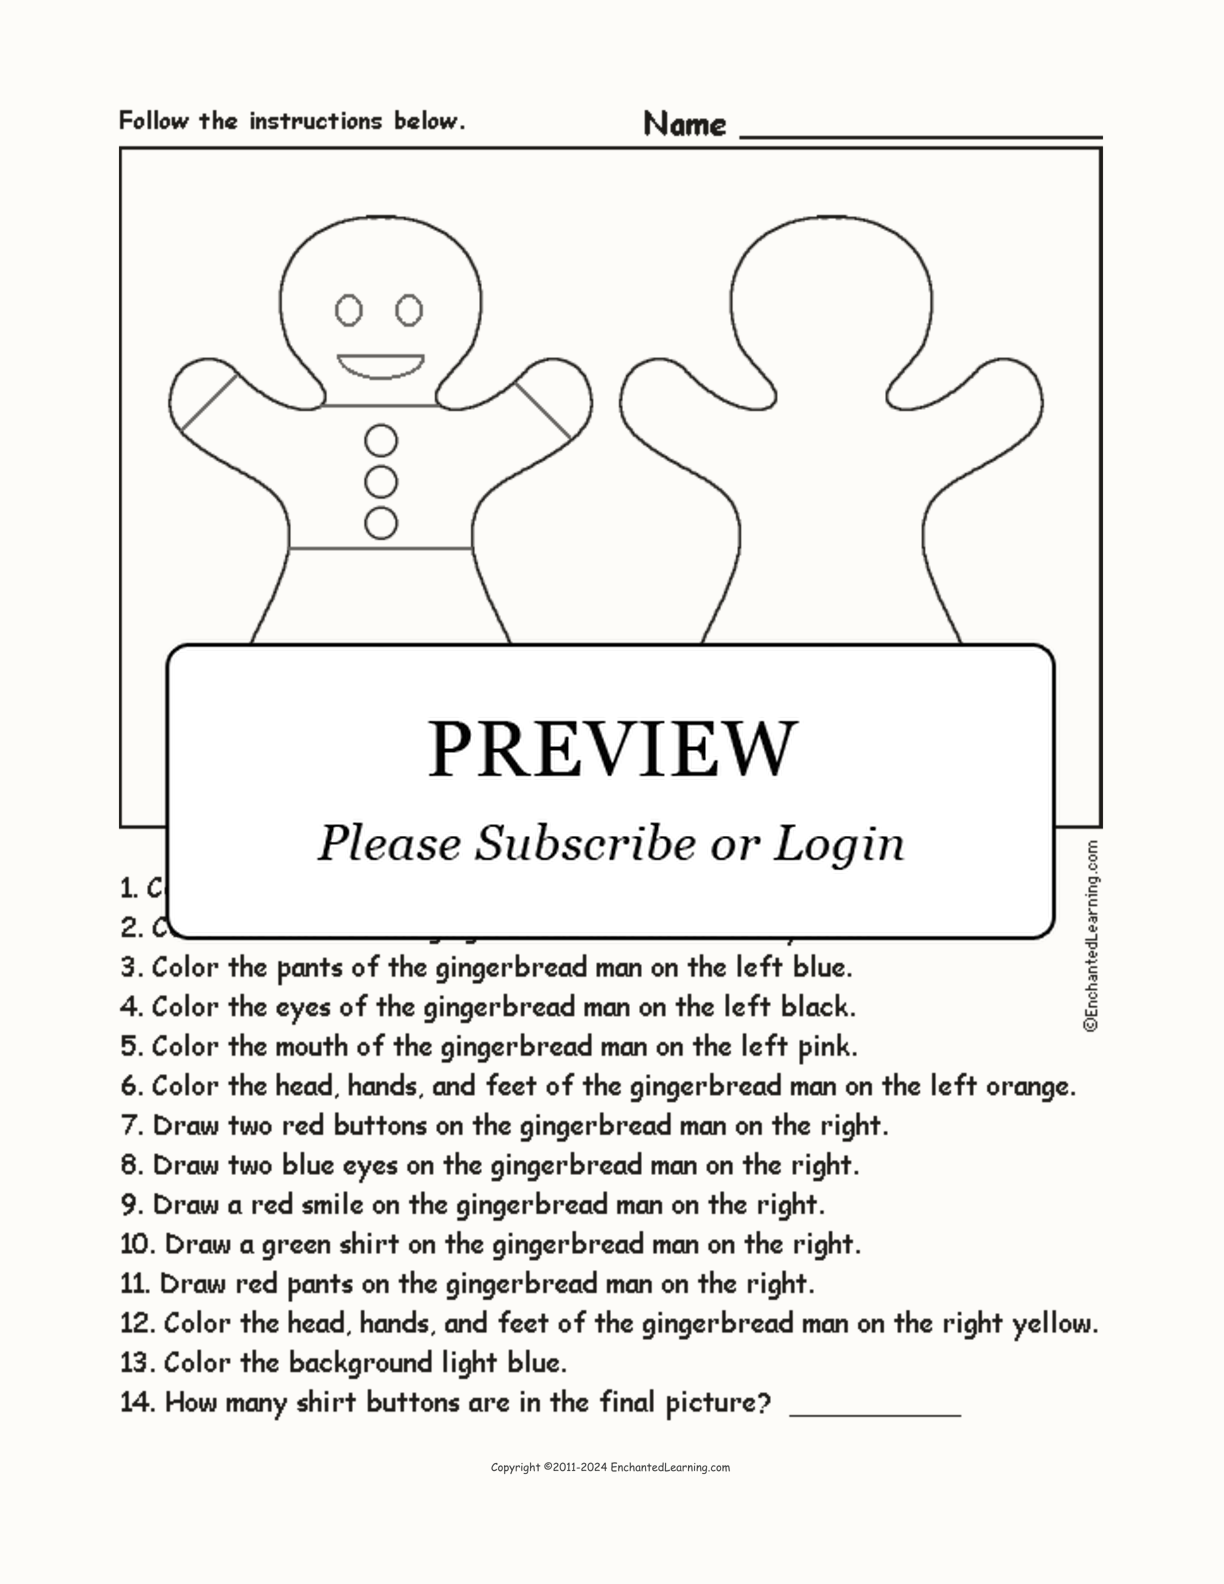 Gingerbread Men - Follow the Instructions interactive worksheet page 1